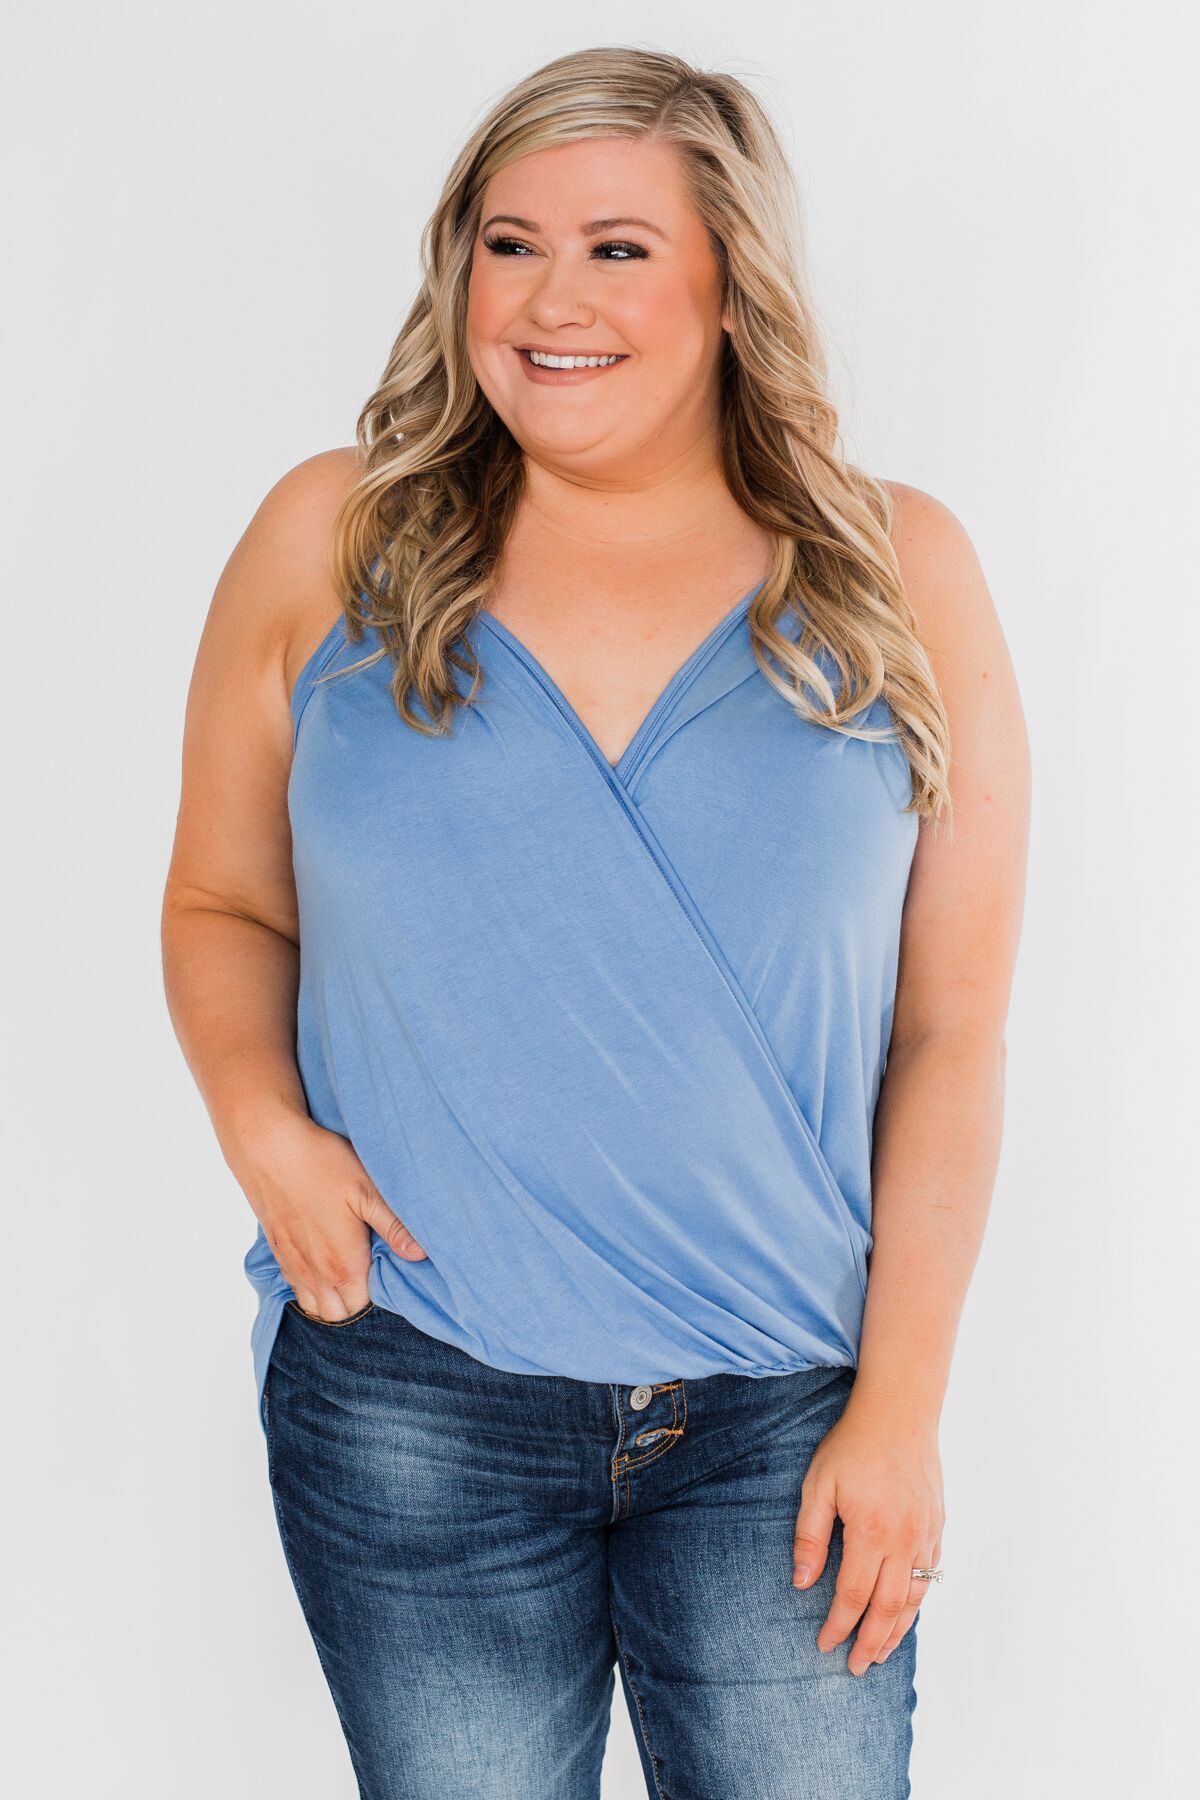 Something Simple Wrap Tank Top- Light Denim – The Pulse Boutique